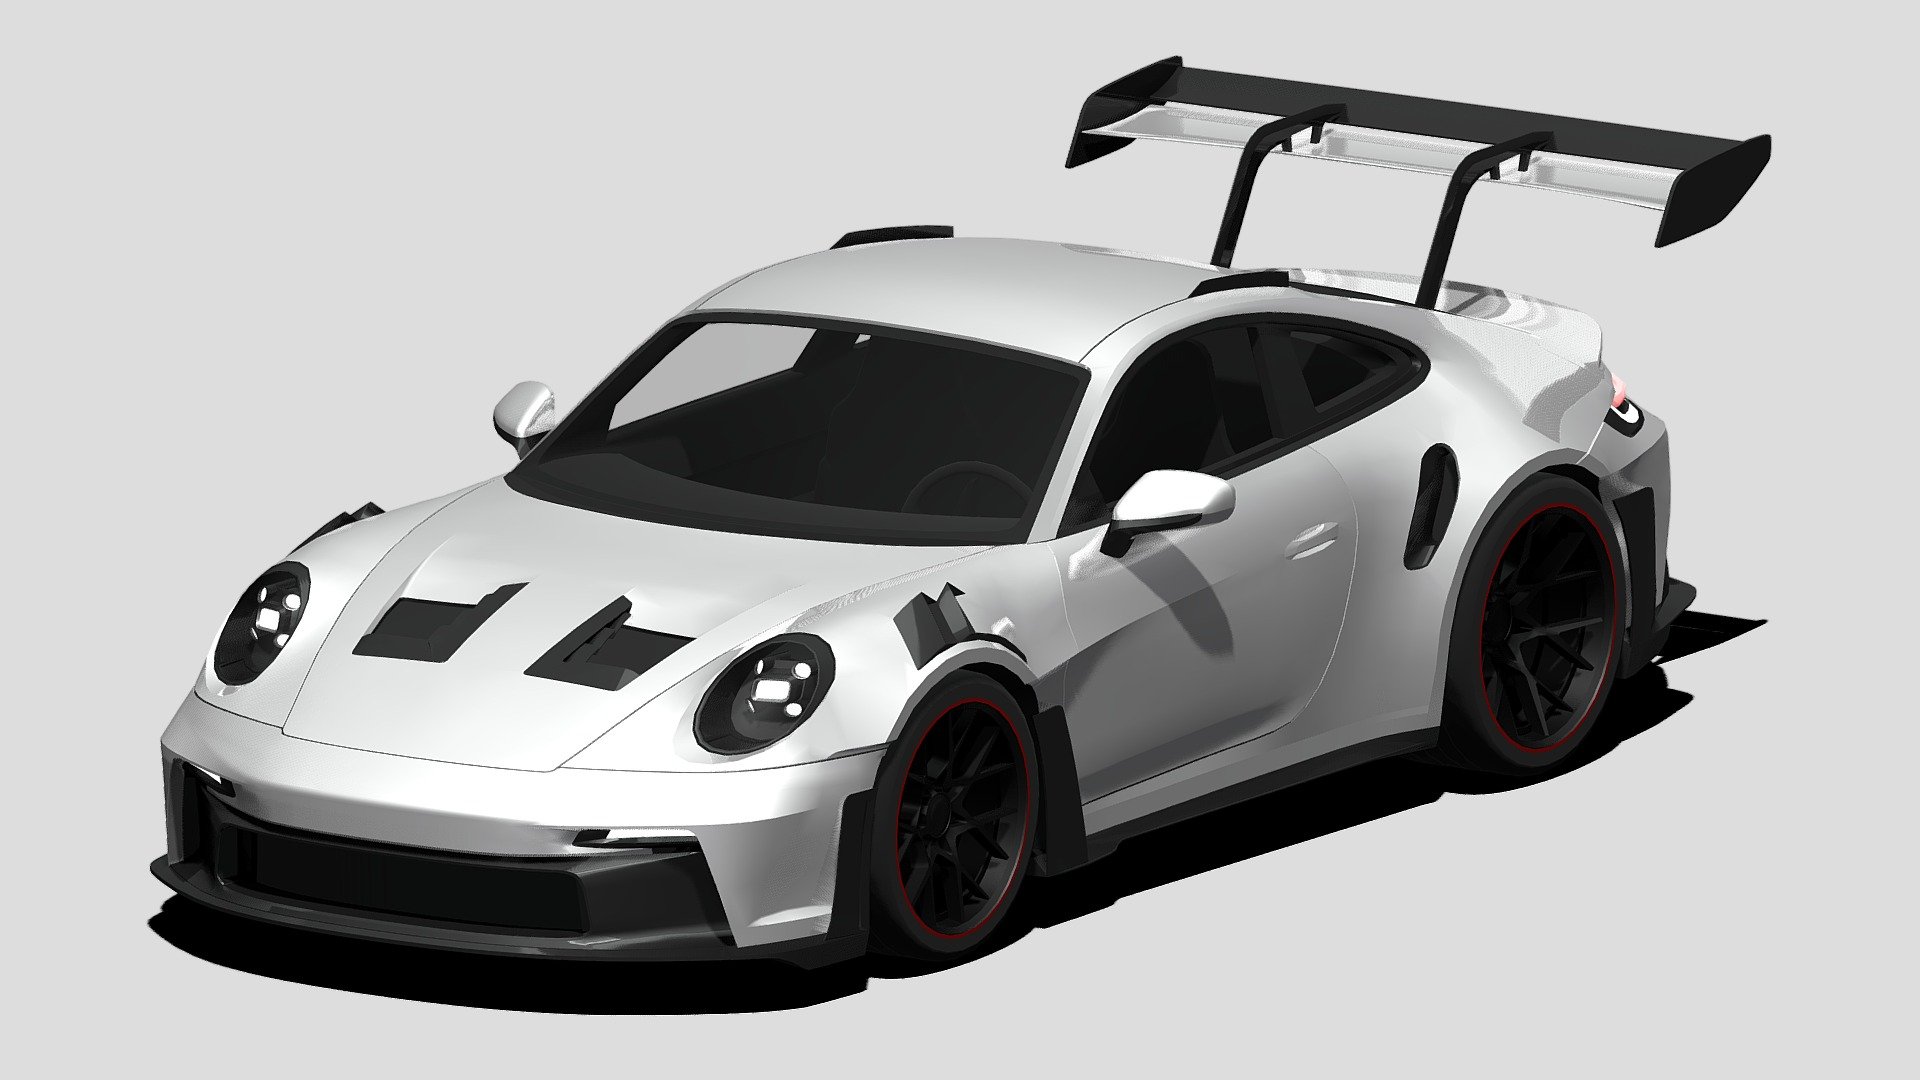 My 911 GT3 RS model. Was originally made for a Roblox game but not used.

-Perfect for Roblox
-Separated parts
-Fully modeled wheels and interior
-3D lights
-Poly optimised - 2022 Porsche 911 GT3 RS - 3D model by Rafale (@RafaleV) 3d model